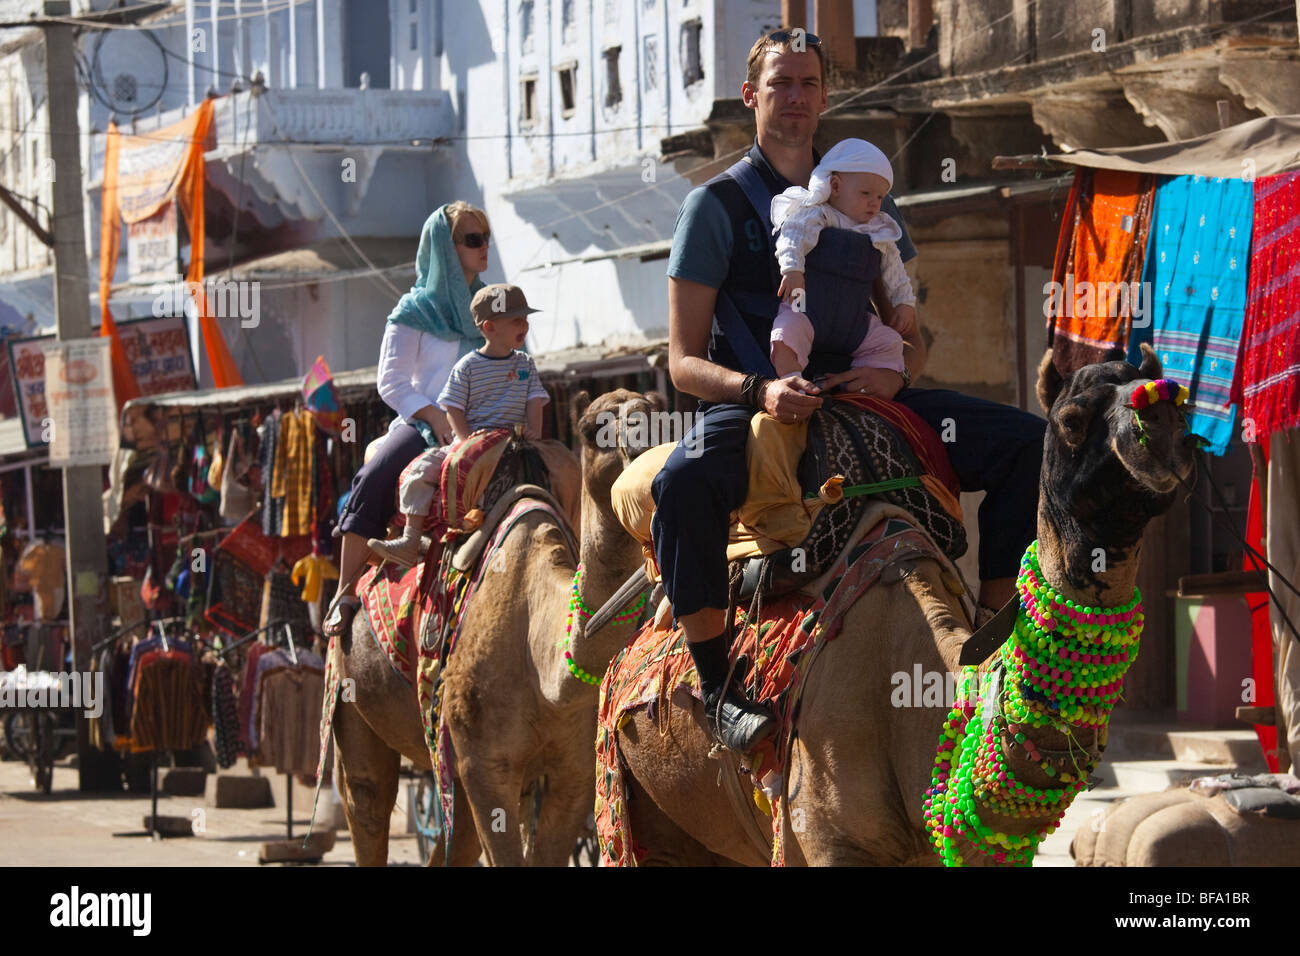 Tourists riding camels during the Camel Fair in Pushkar India Stock Photo